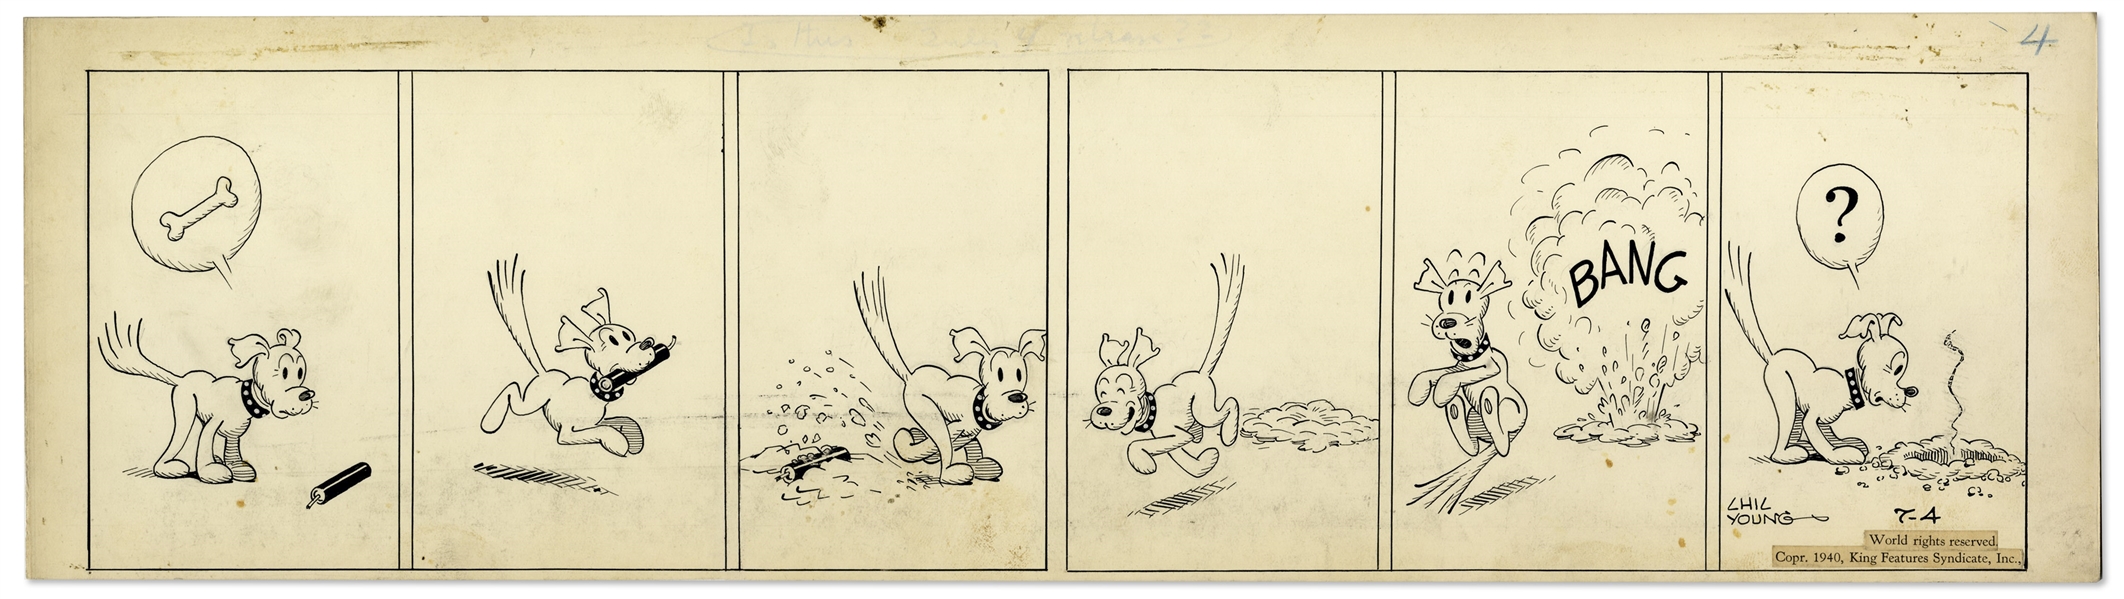 Chic Young Hand-Drawn ''Blondie'' Comic Strip From 1940 Titled ''A Bone To Pick With Somebody'' -- July 4th Firecracker Strip